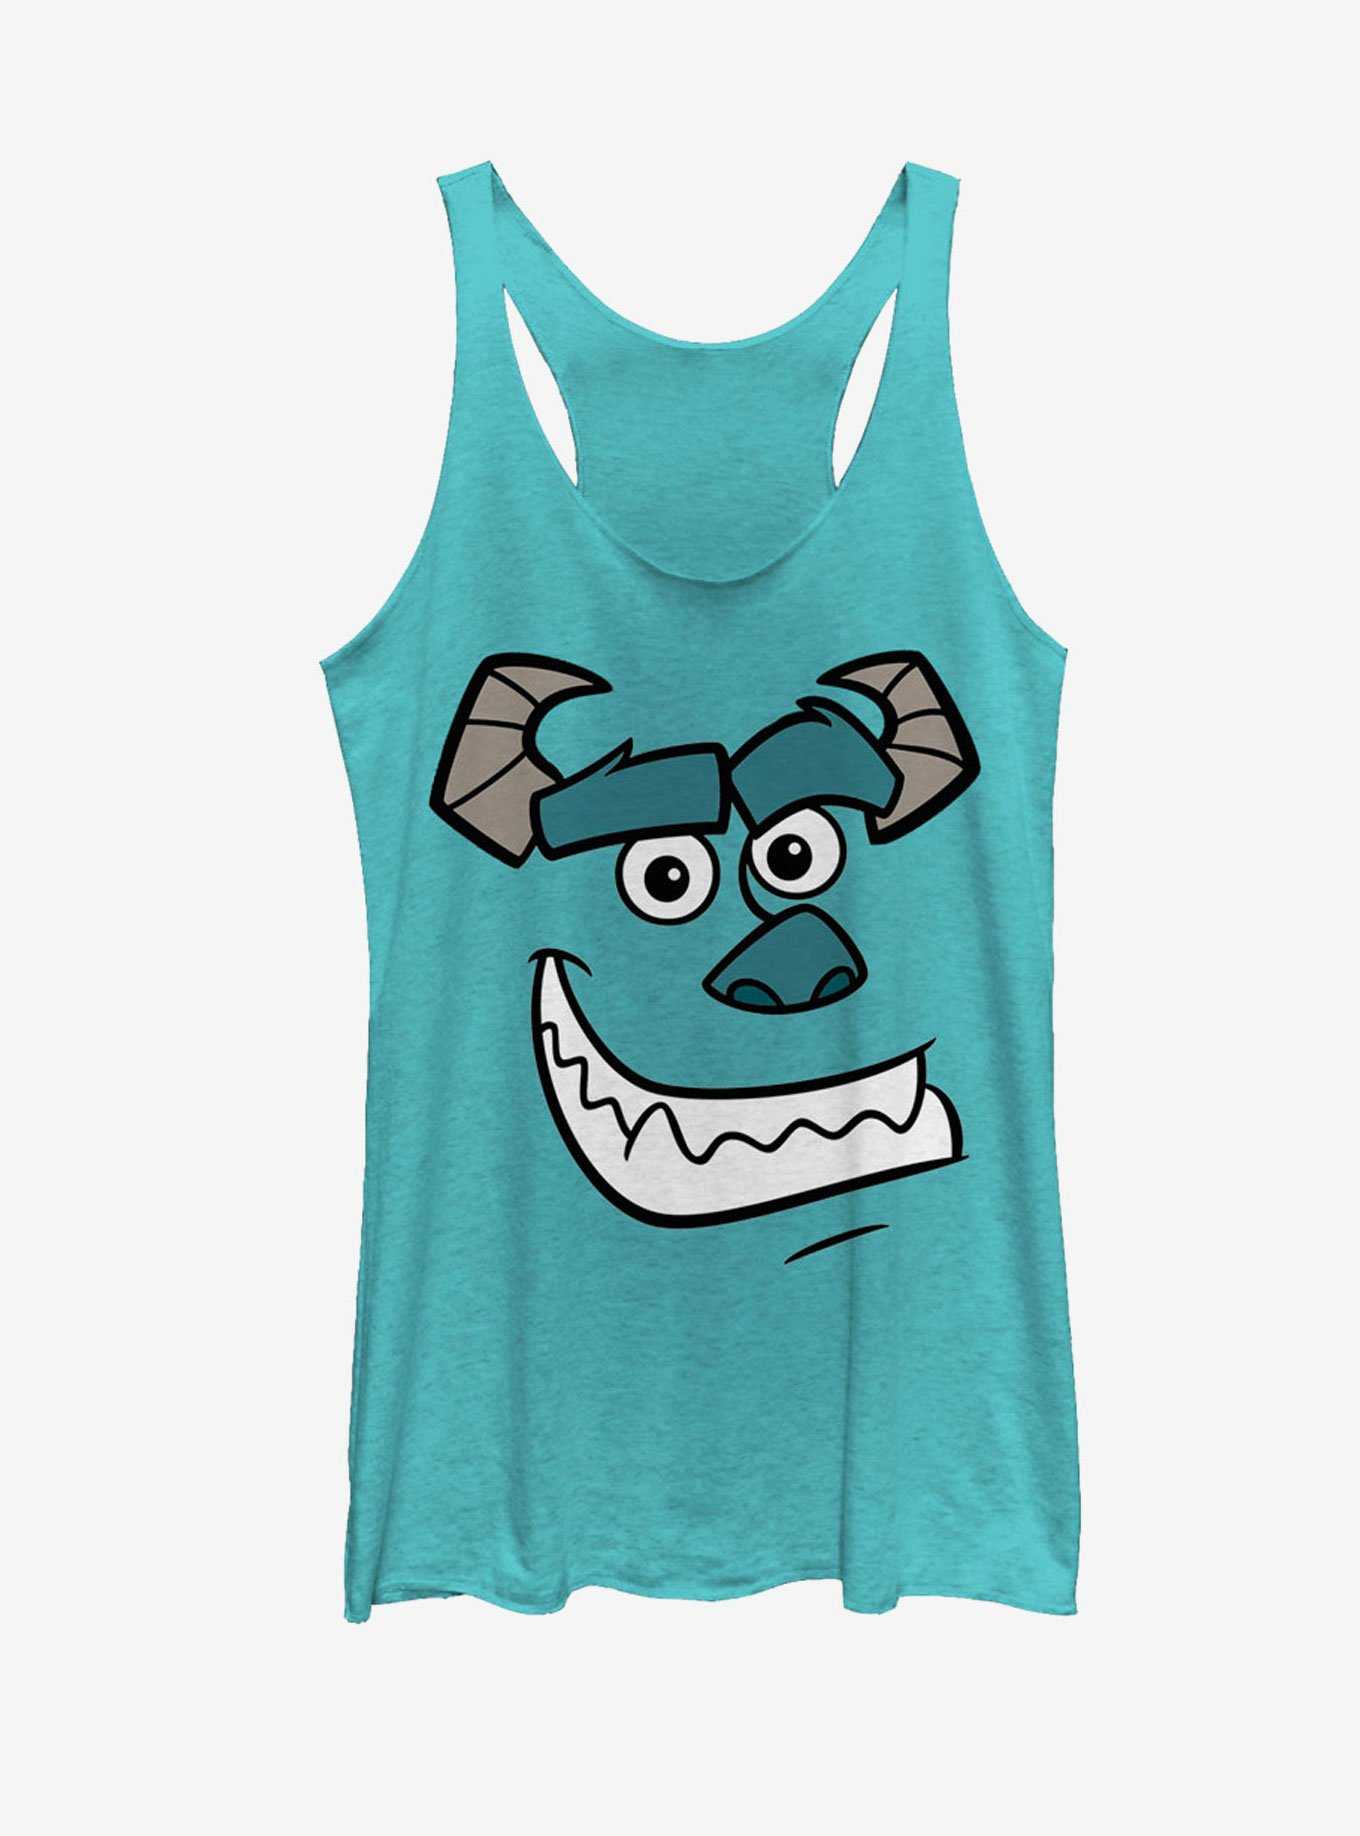 Disney Monster's Inc Sulley Face Womens Tank, , hi-res